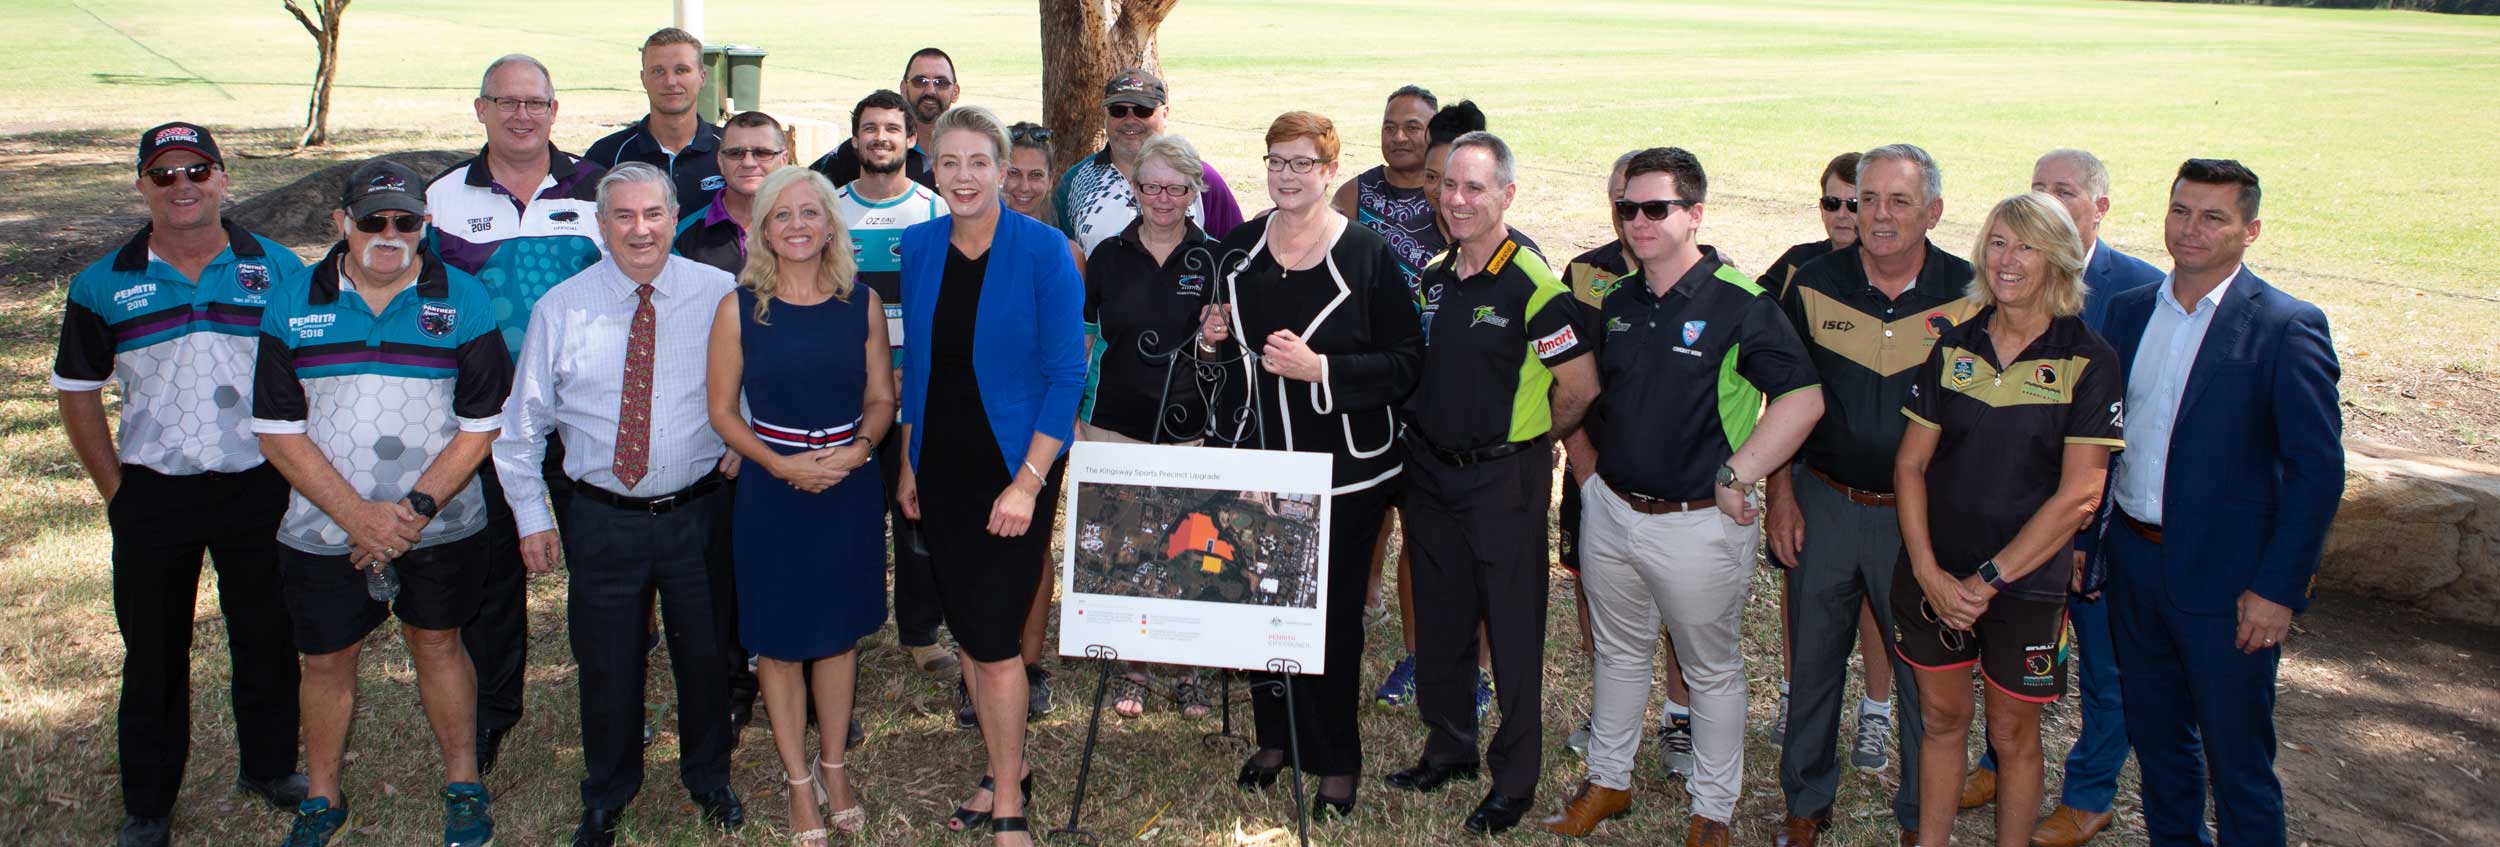 Penrith Mayor Ross Fowler OAM joined Federal Ministers, Senator the Hon. Bridget McKenzie and Senator the Hon. Marise Payne with local sporting groups (Cricket, Oztag and Touch Football) at The Kingsway for the announcement of upgrades to the lights and playing surface.